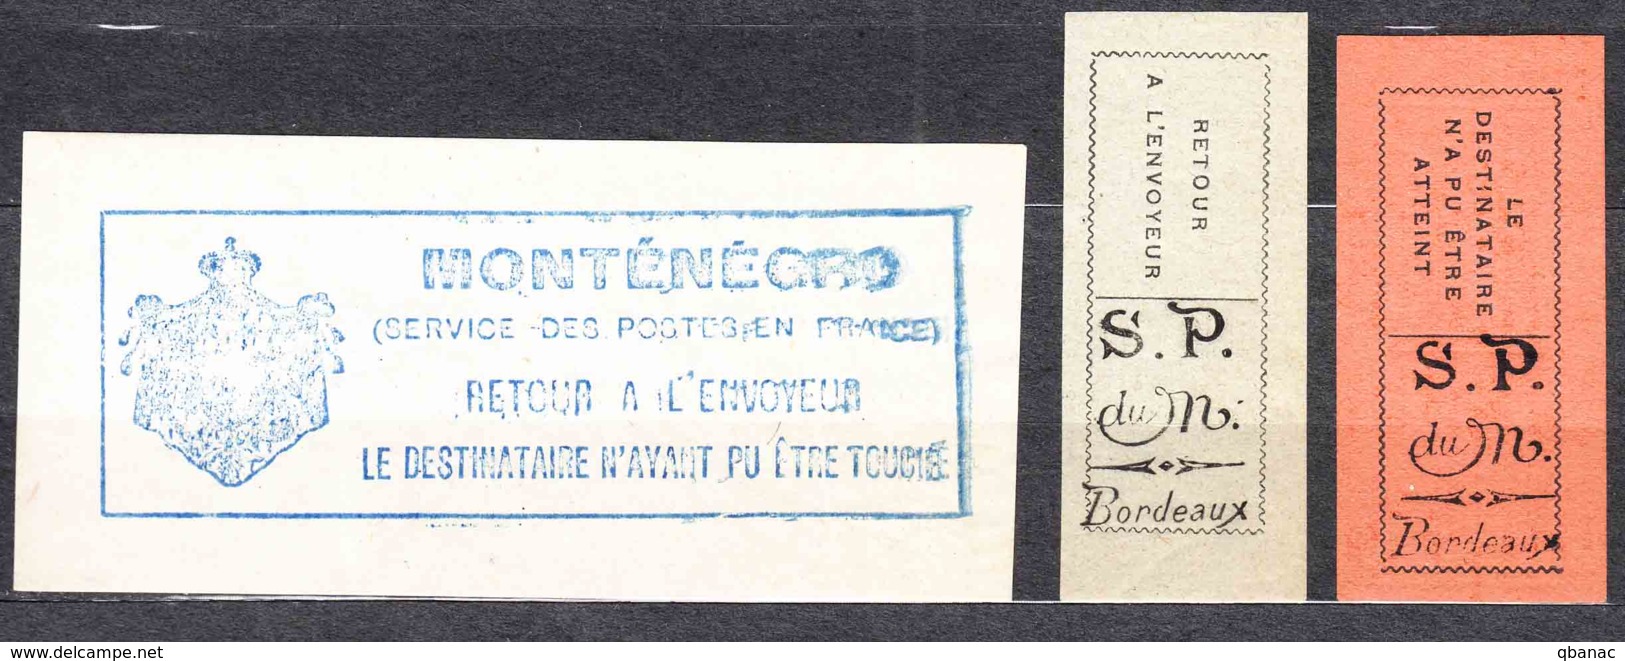 Montenegro 1916 Labels For Return Mail, Refugee Gov. Issue For Monteregro Office In Bordeaux, All 3, Never Hinged, Sig. - Guerre (timbres De)